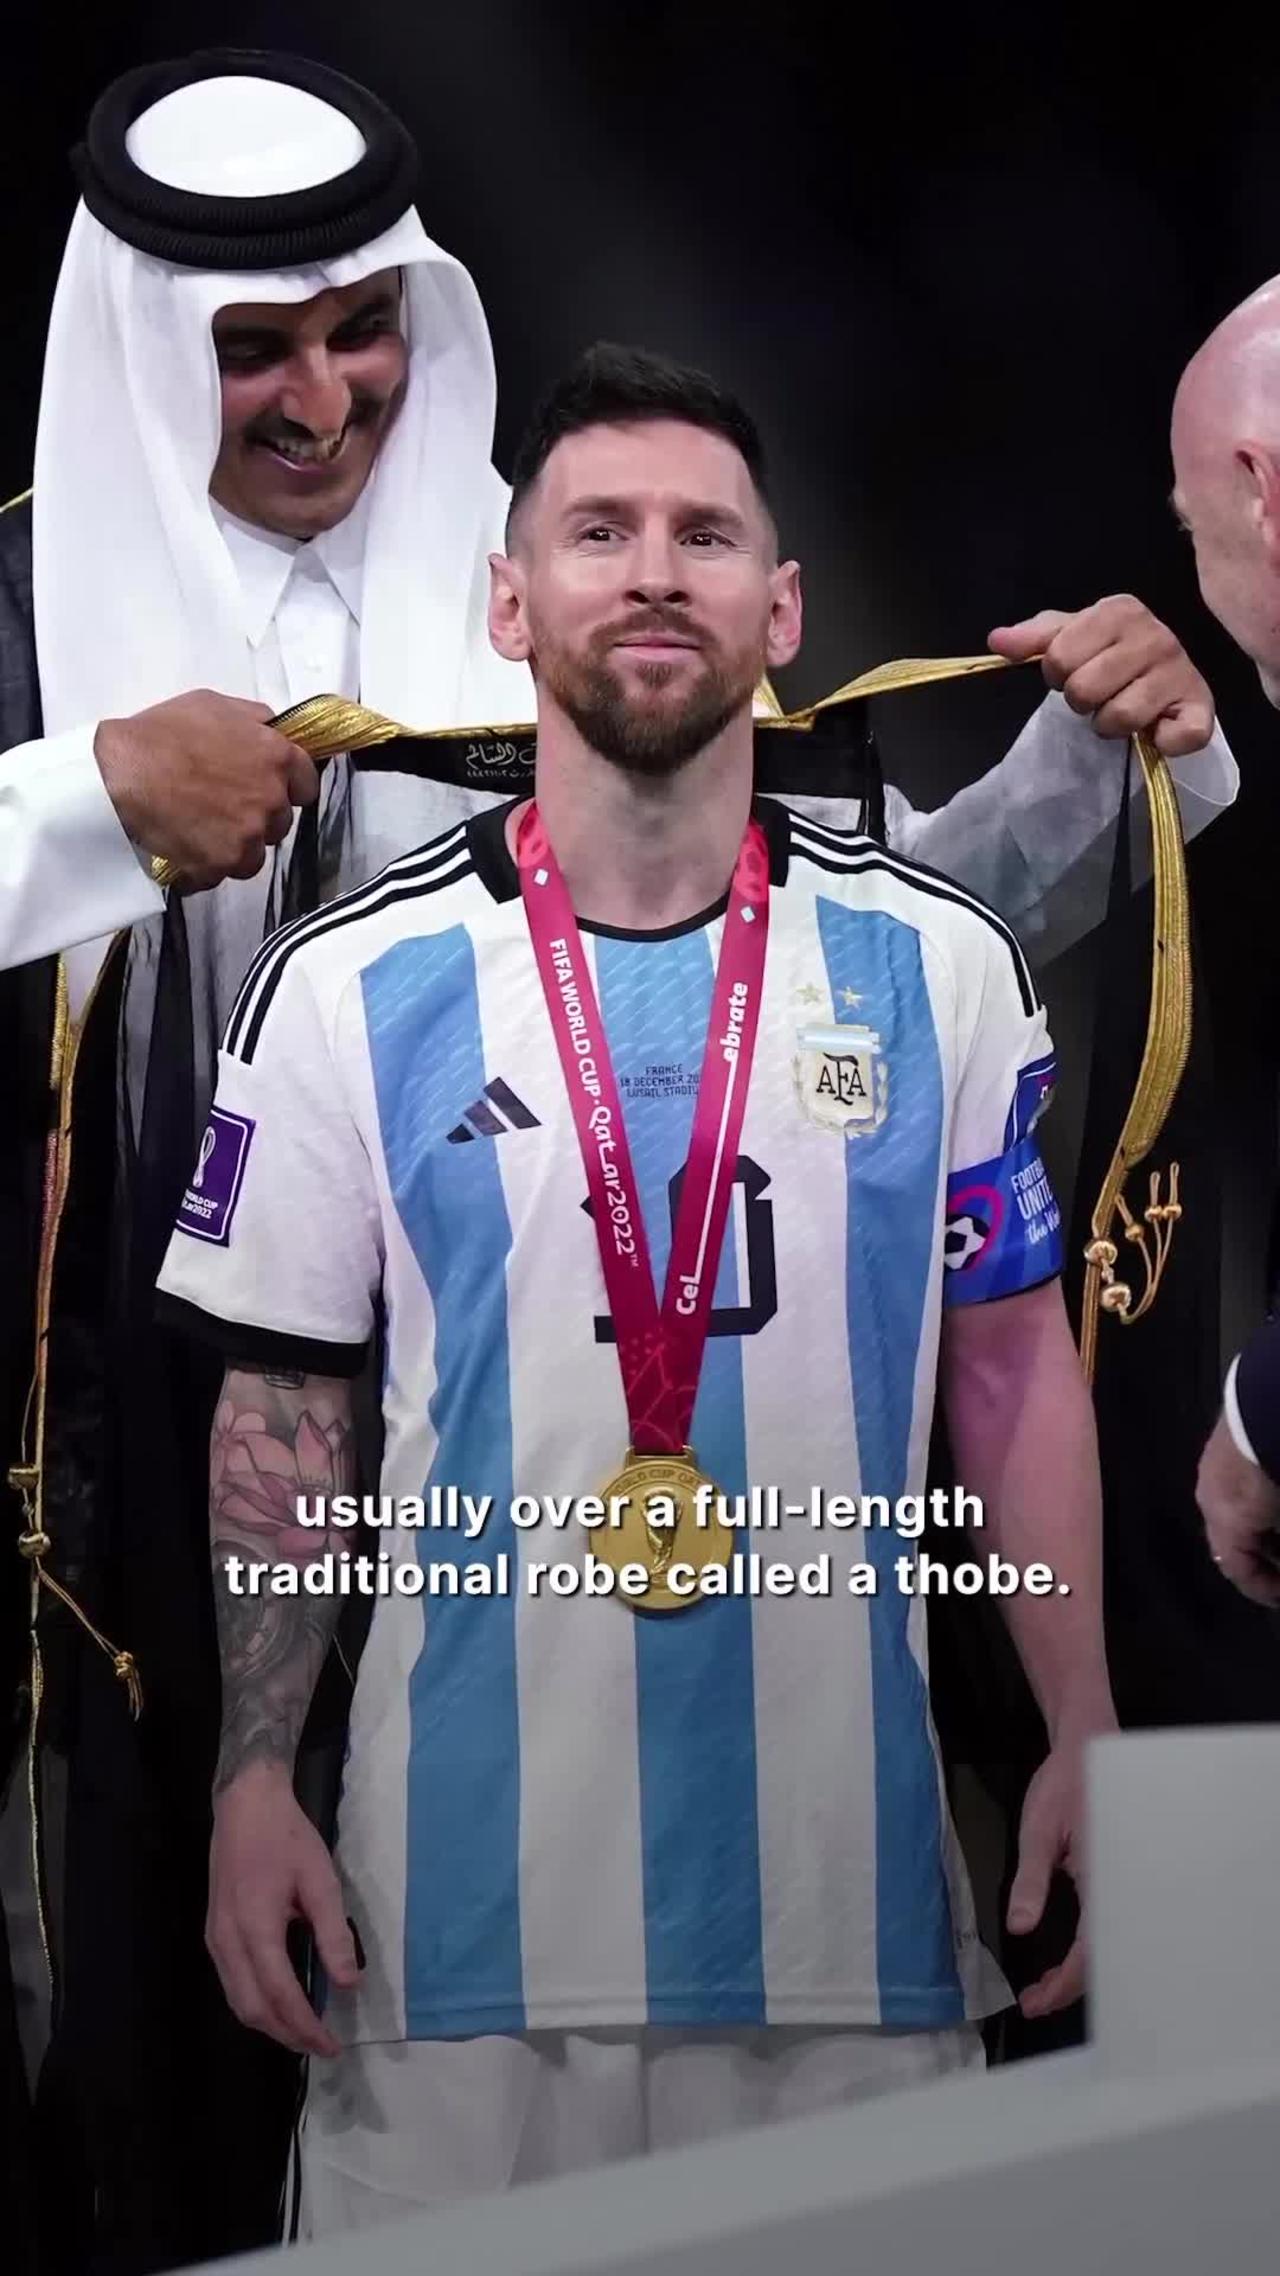 After winning the World Cup, the Emir of Qatar gave Argentina captain Lionel Messi a bisht